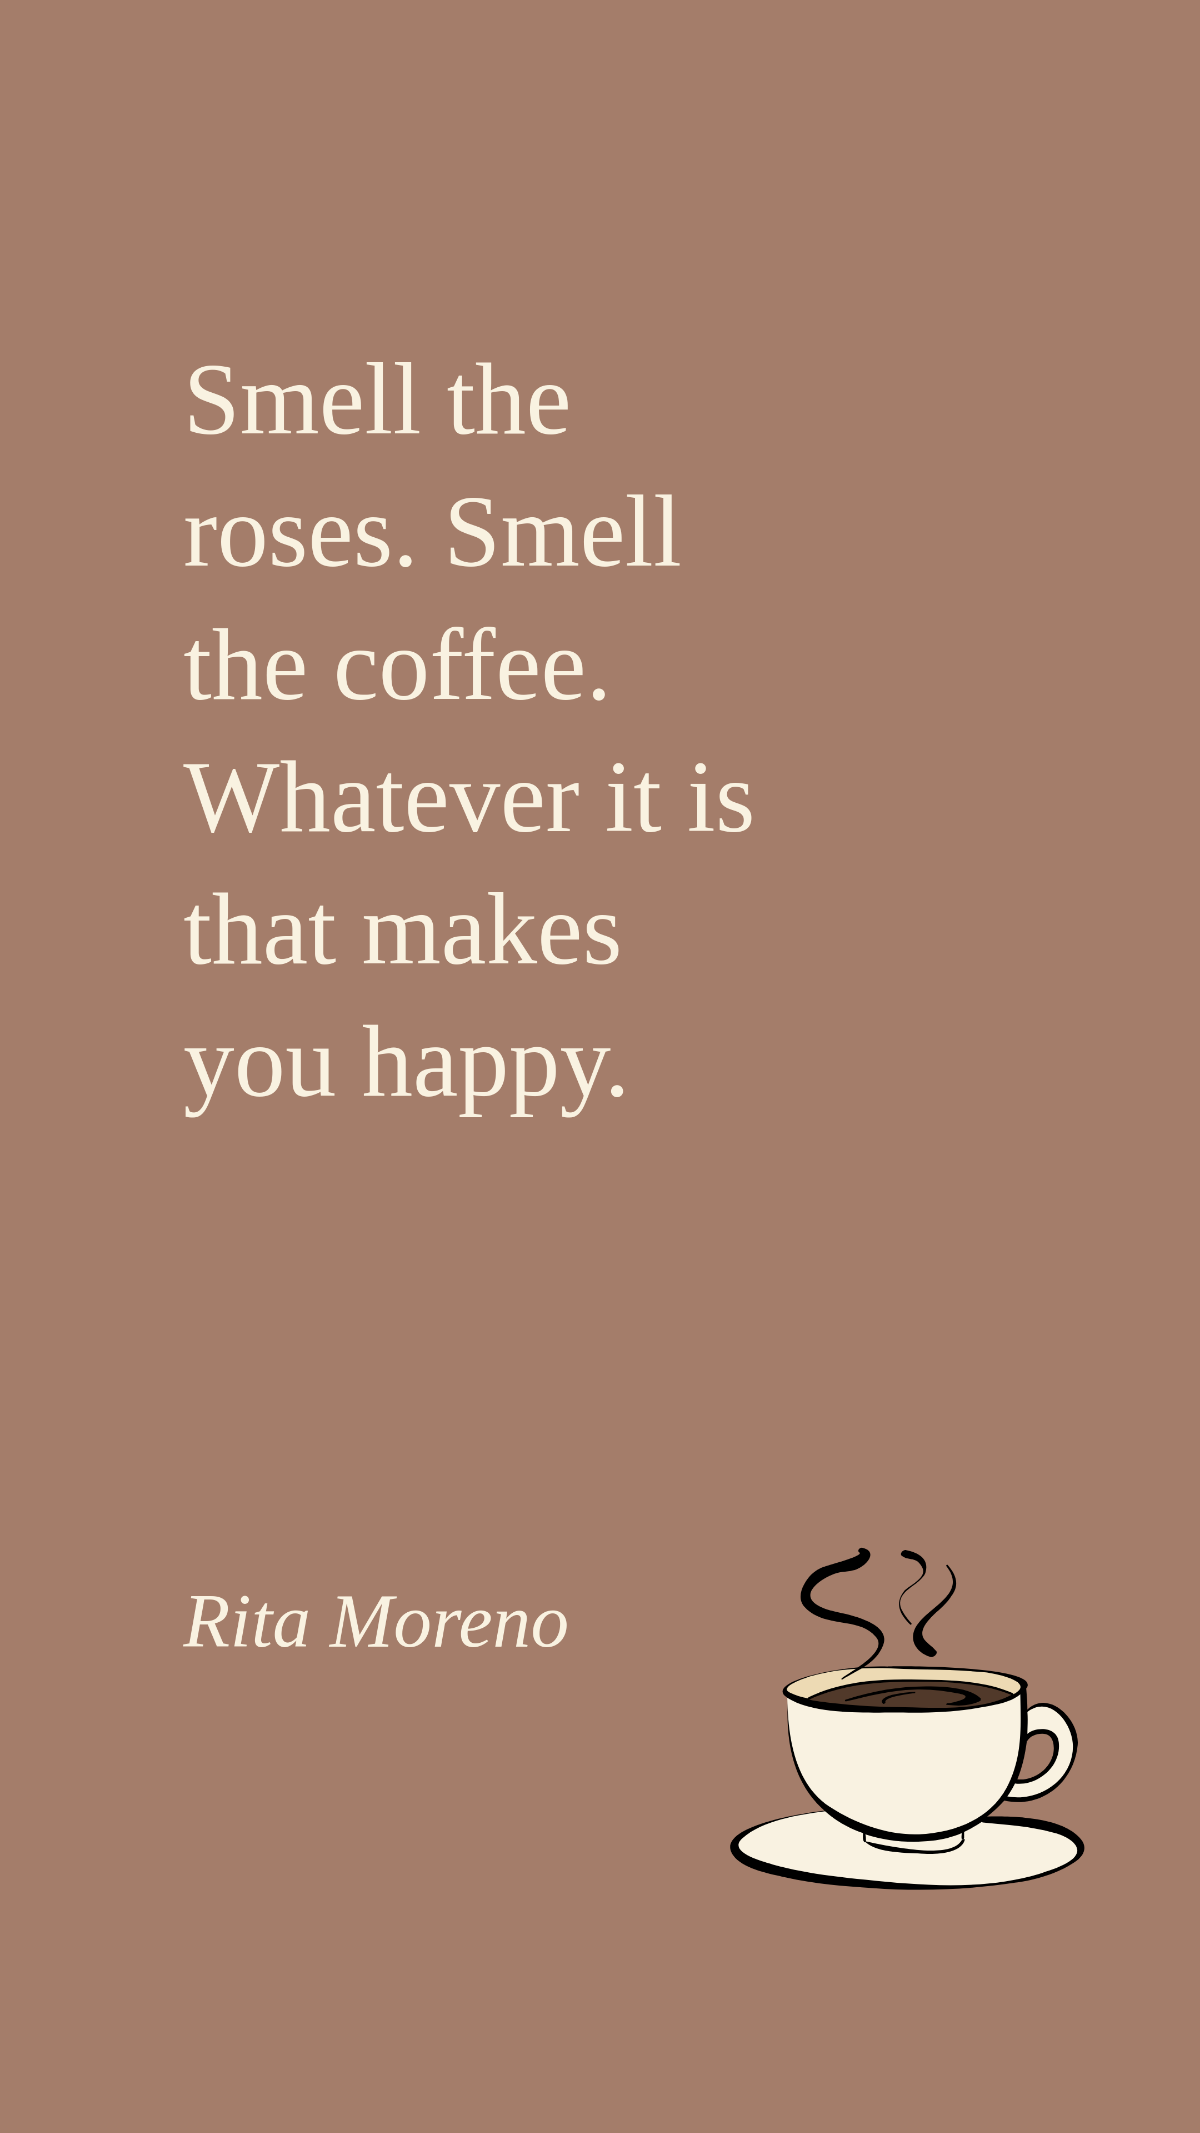 Free Rita Moreno - Smell the roses. Smell the coffee. Whatever it is that makes you happy. Template